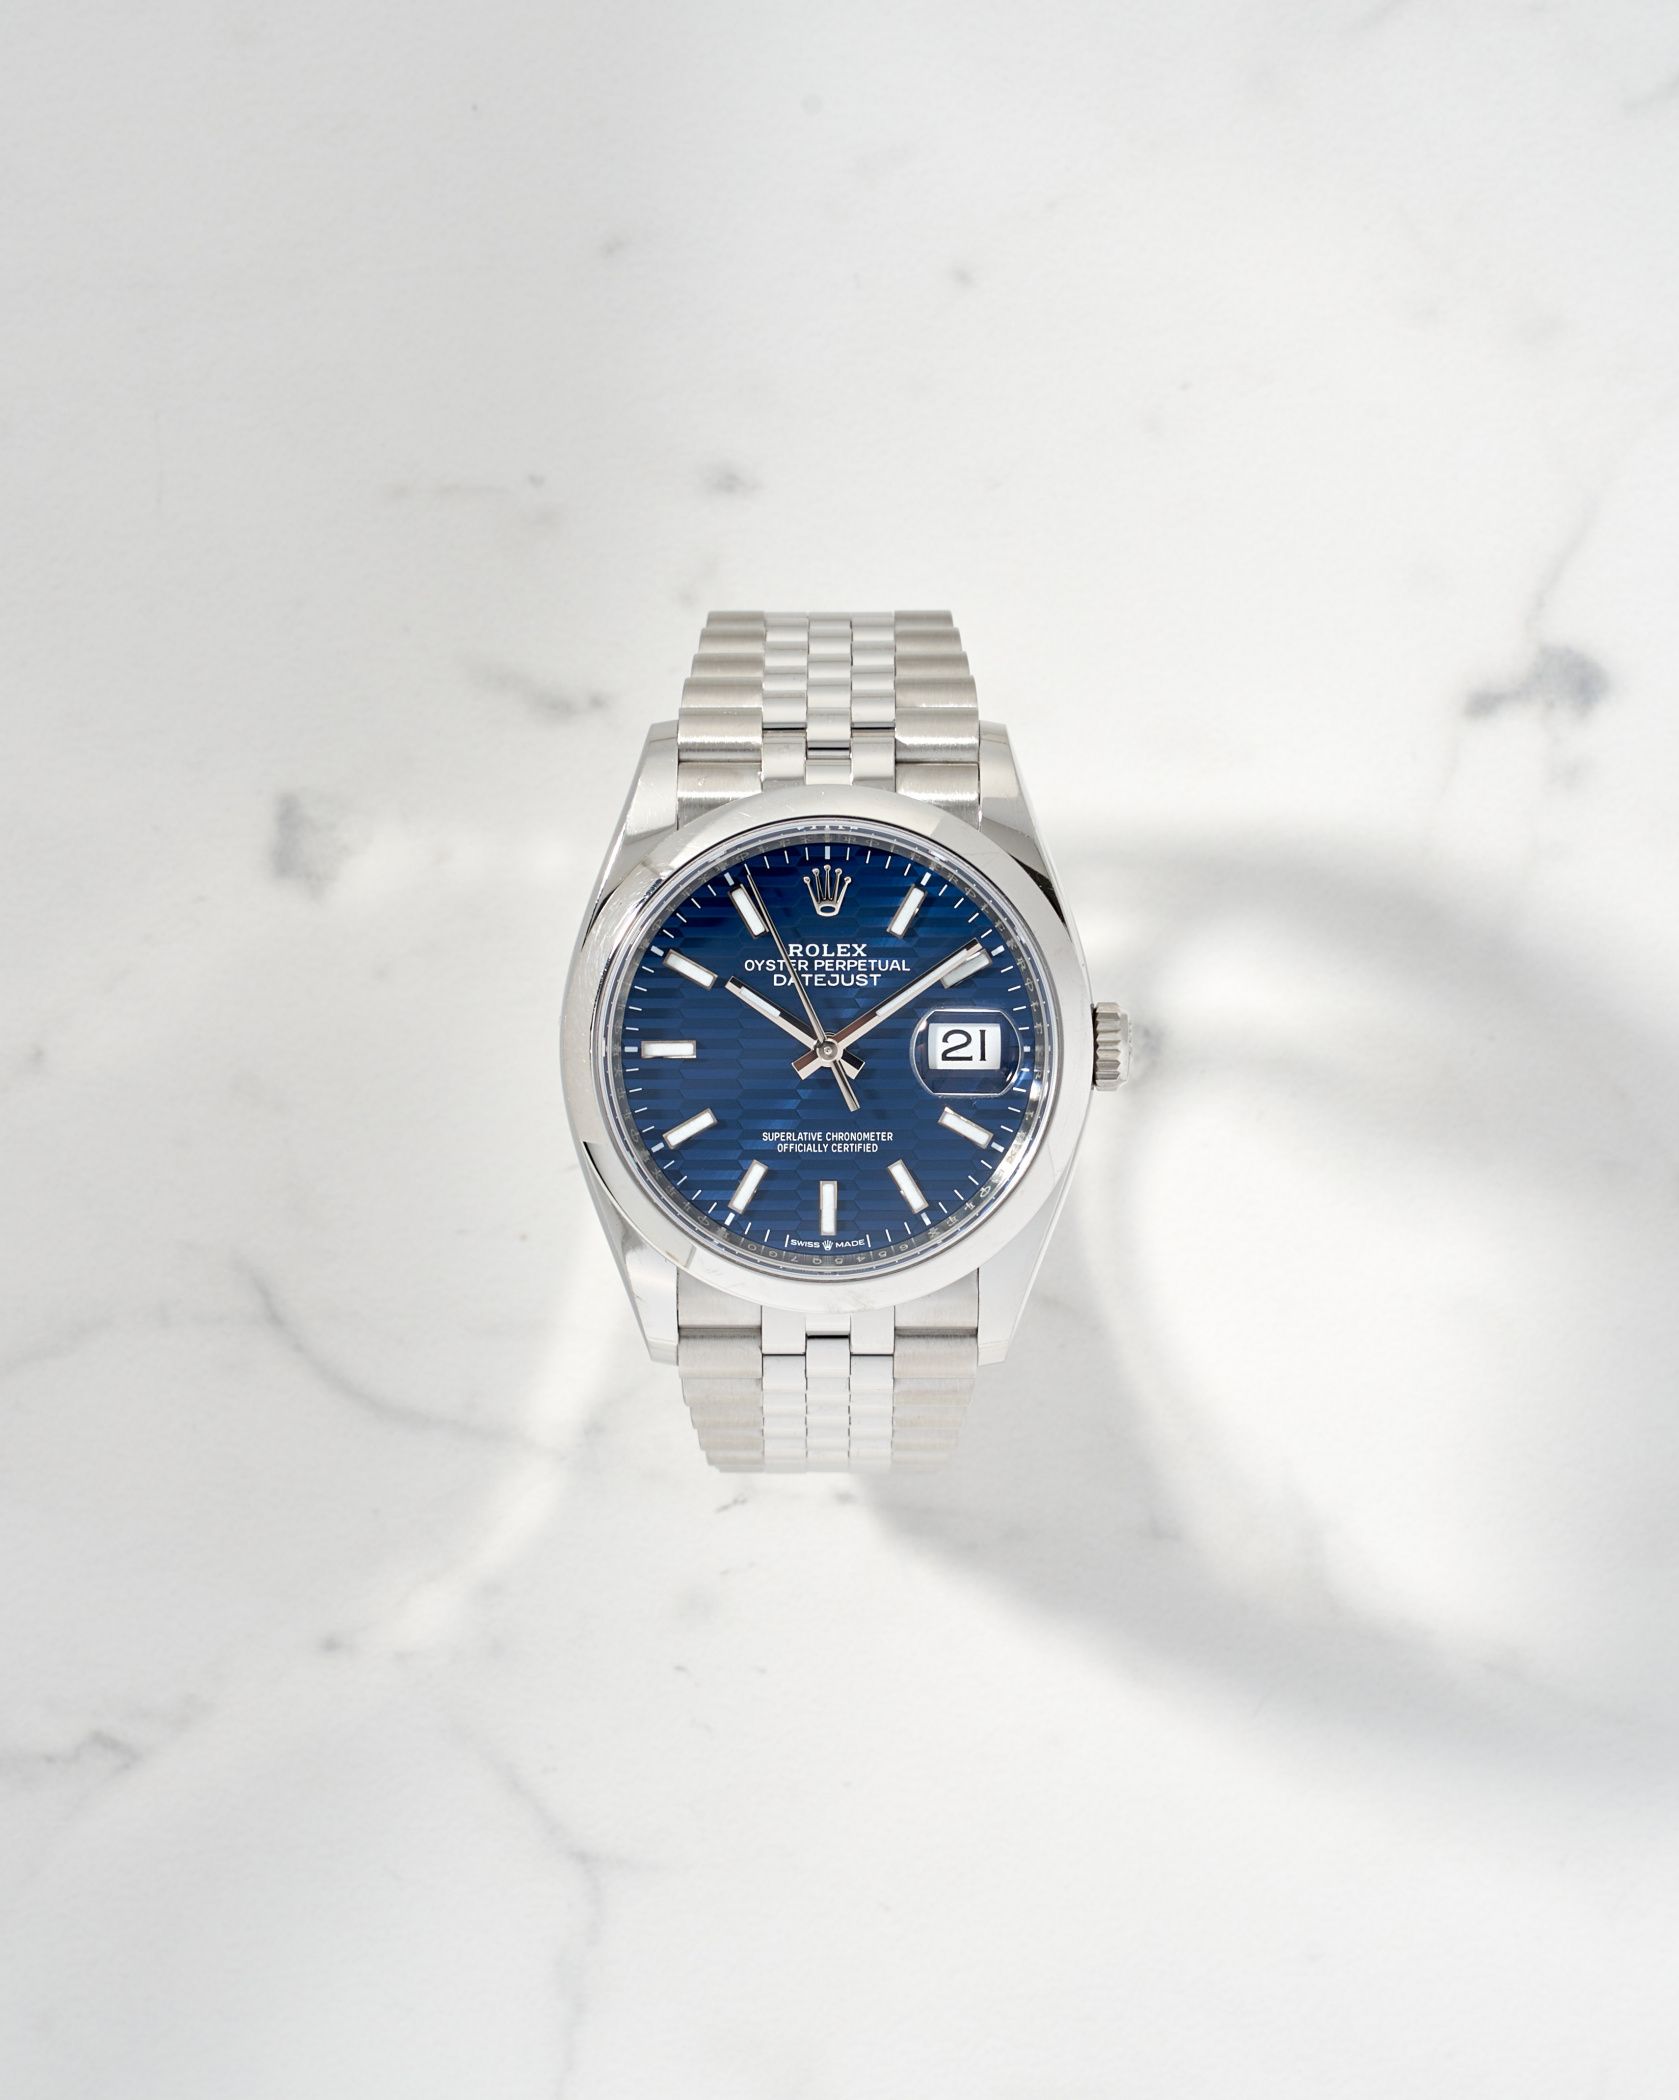 Rolex Datejust 36mm Fluted Blue dial 